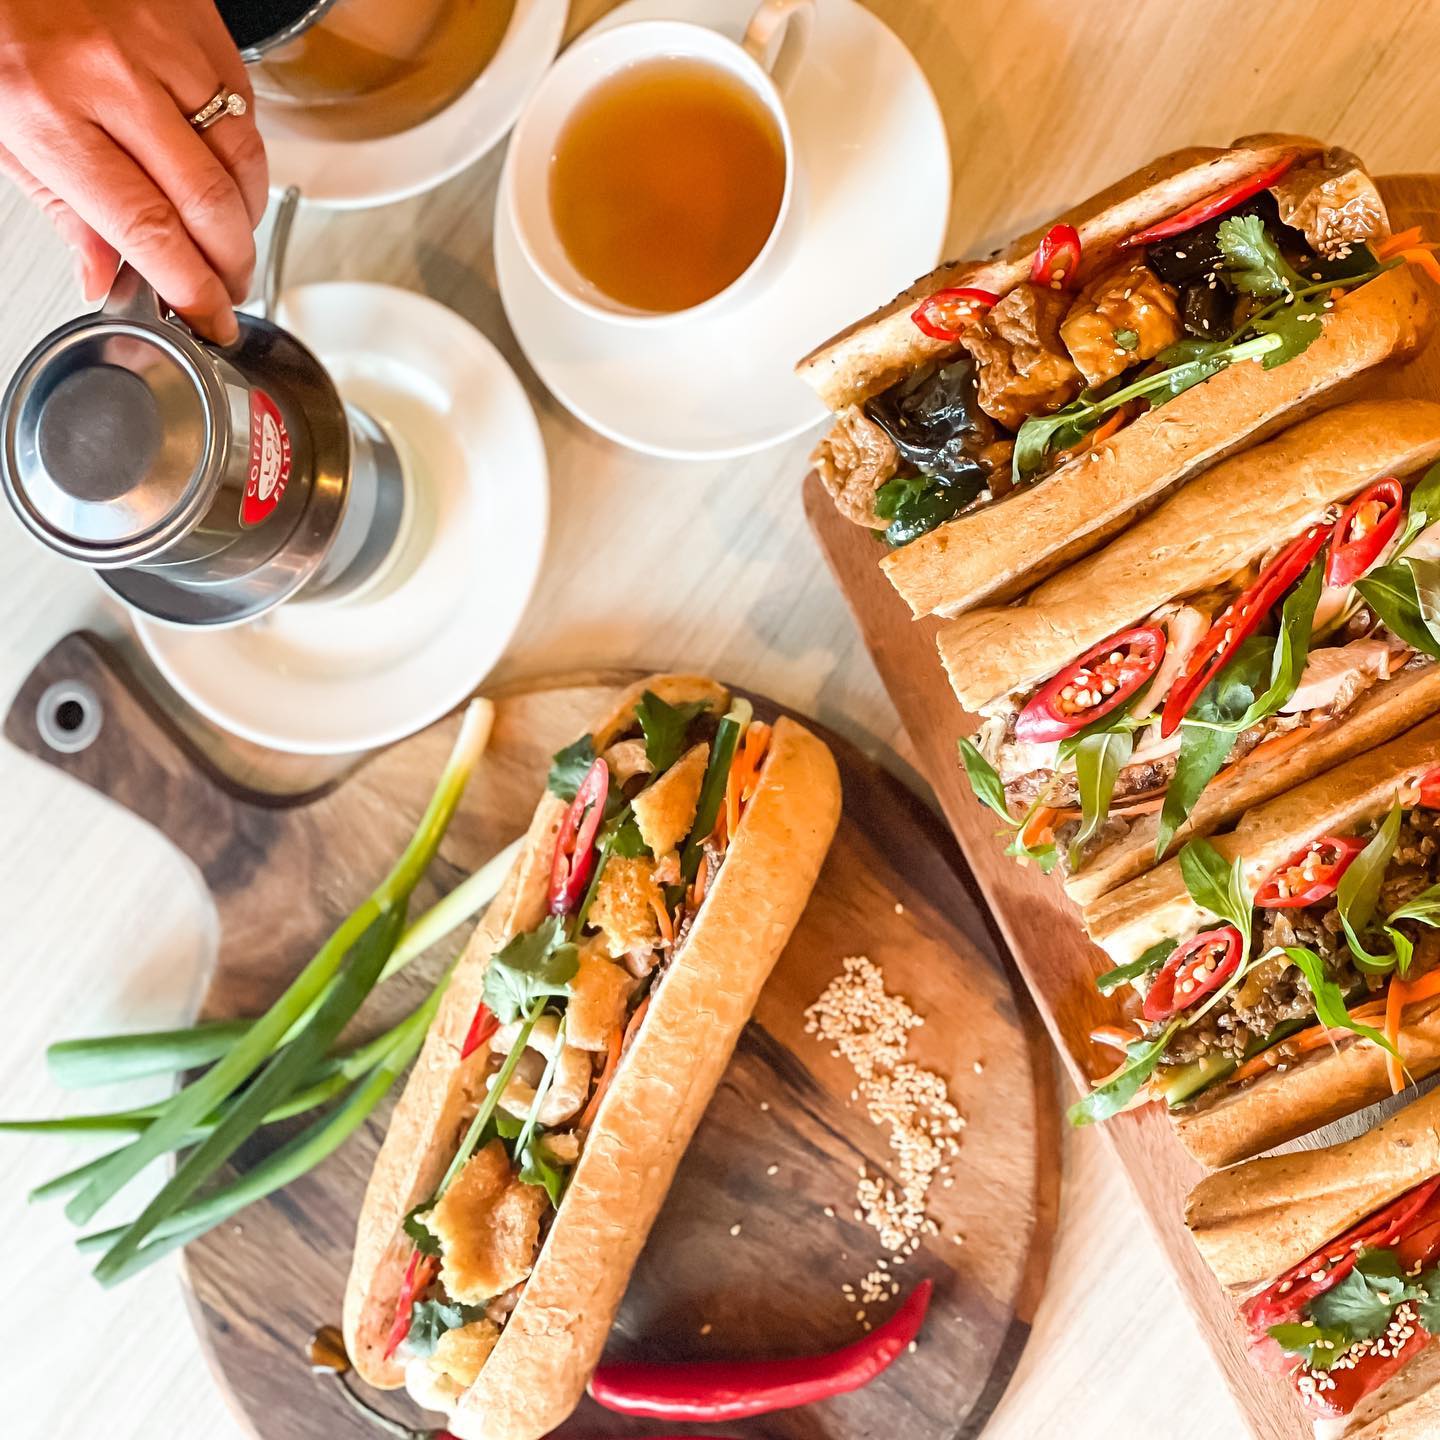 The perfect grab & go lunch. 
Banh mi + drink combo $13.5 only! 

1. Select your favourite gluten roll:
- Charcoal grilled chicken 
- Crispy pork belly
- Tofu & Eggplant (V)

2. Choose one non-alcoholic drink:
- Vietnamese iced coffee
- Homemade lemon iced tea
- Homemade lychee iced tea
- One soft drink 

GLUTEN FREE OPTION AVAILABLE TOO! Check our website hanoirose.com.au for more.